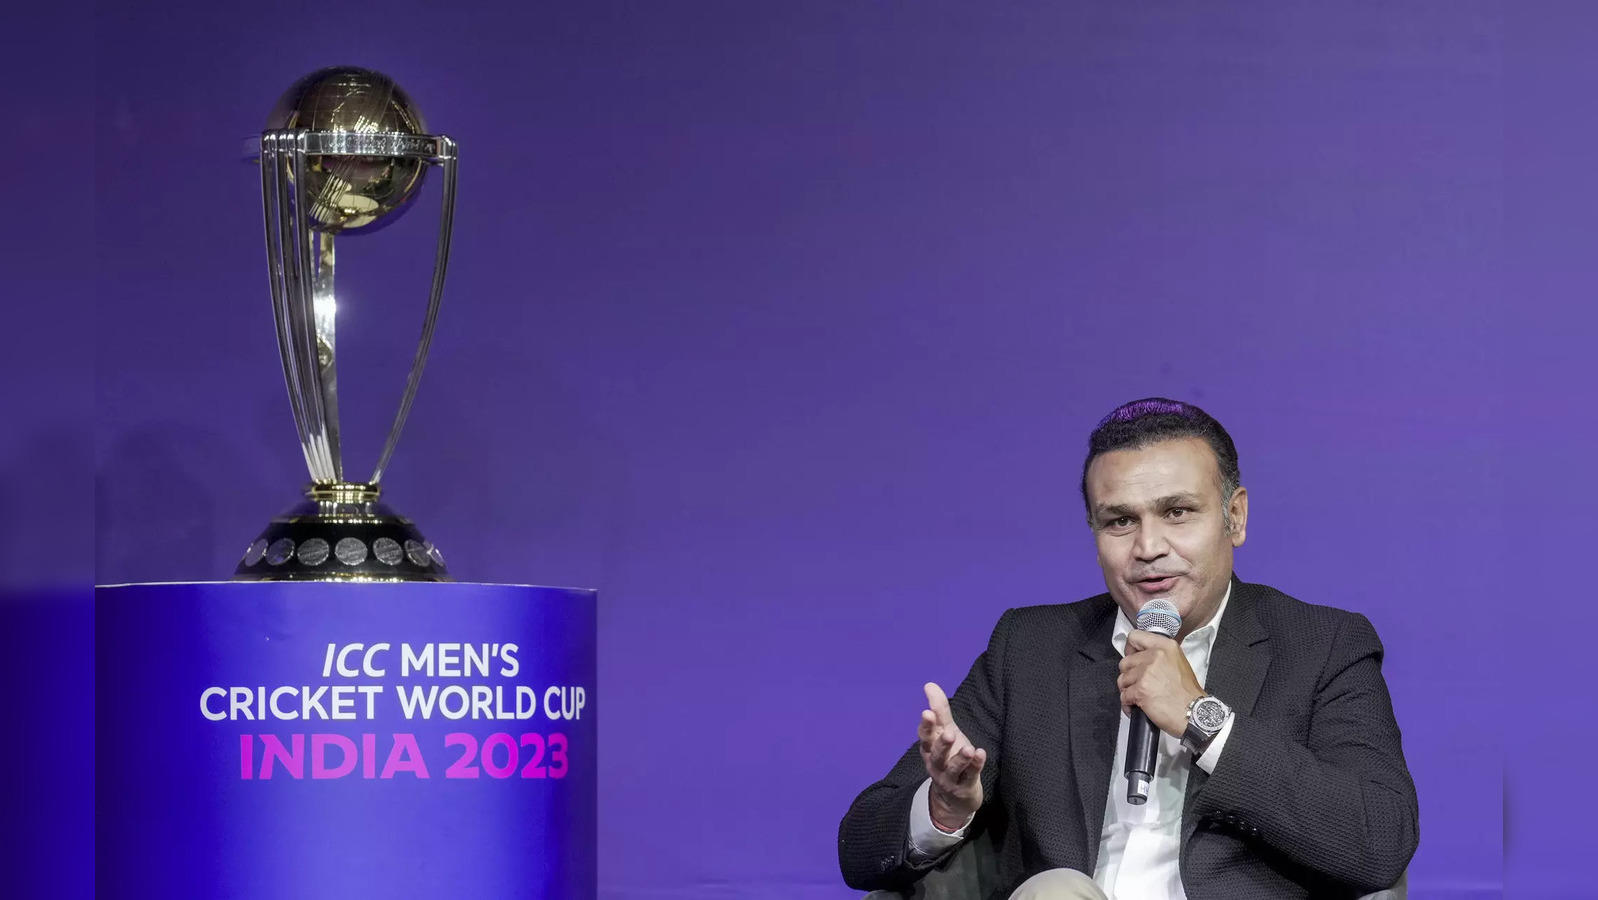 T20 World Cup: Knew spin would play a major role, says Sri Lanka